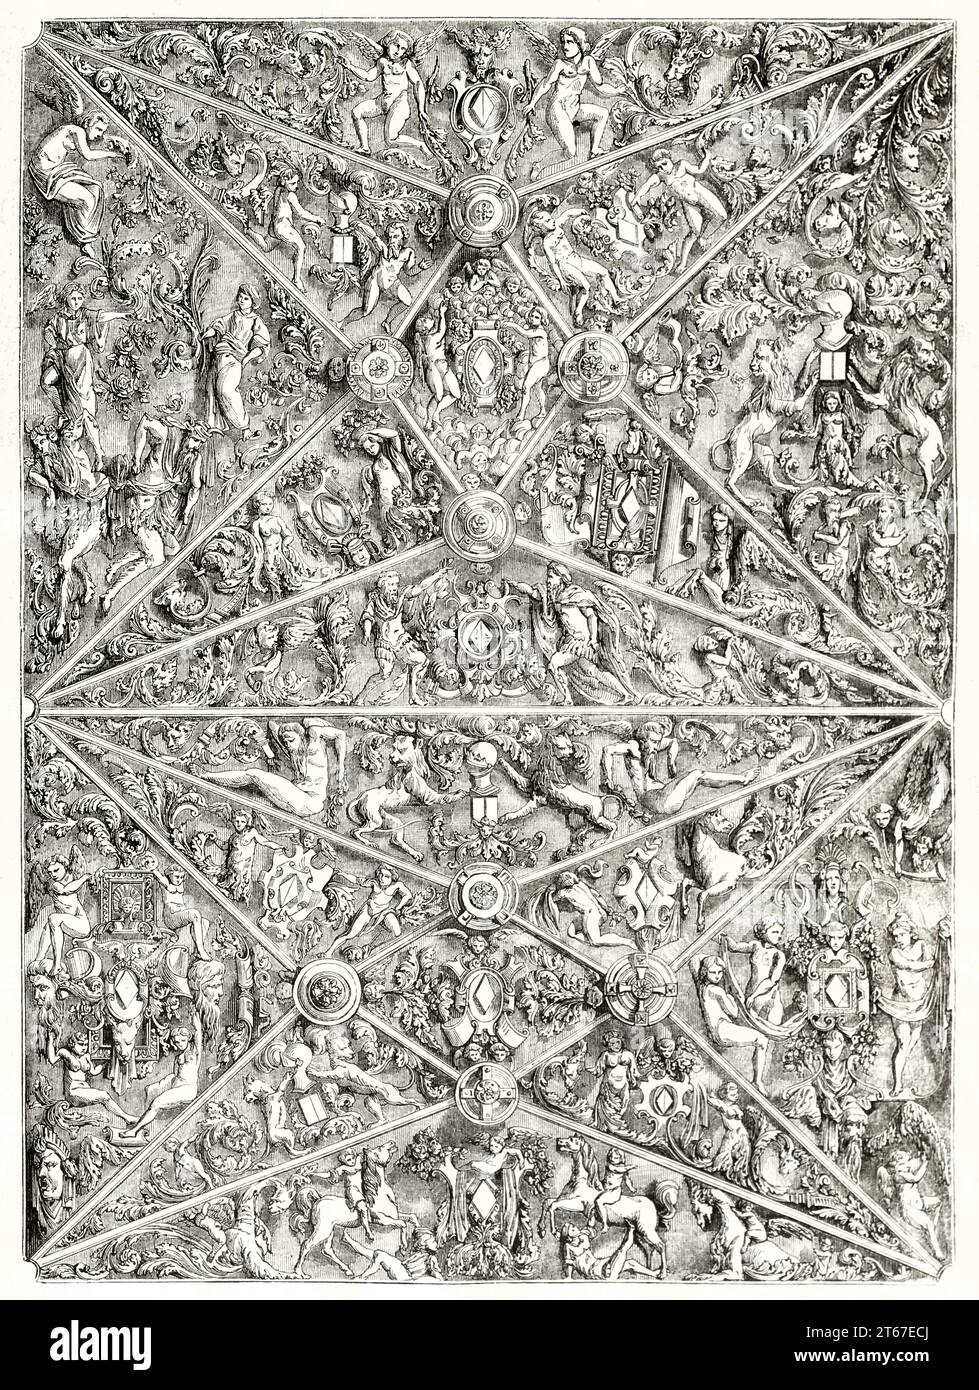 Old illustration of the ceiling of Tilliers-sur-Avre church choir. By Lancelot, publ. on Magasin Pittoresque, Paris, 1851 Stock Photo